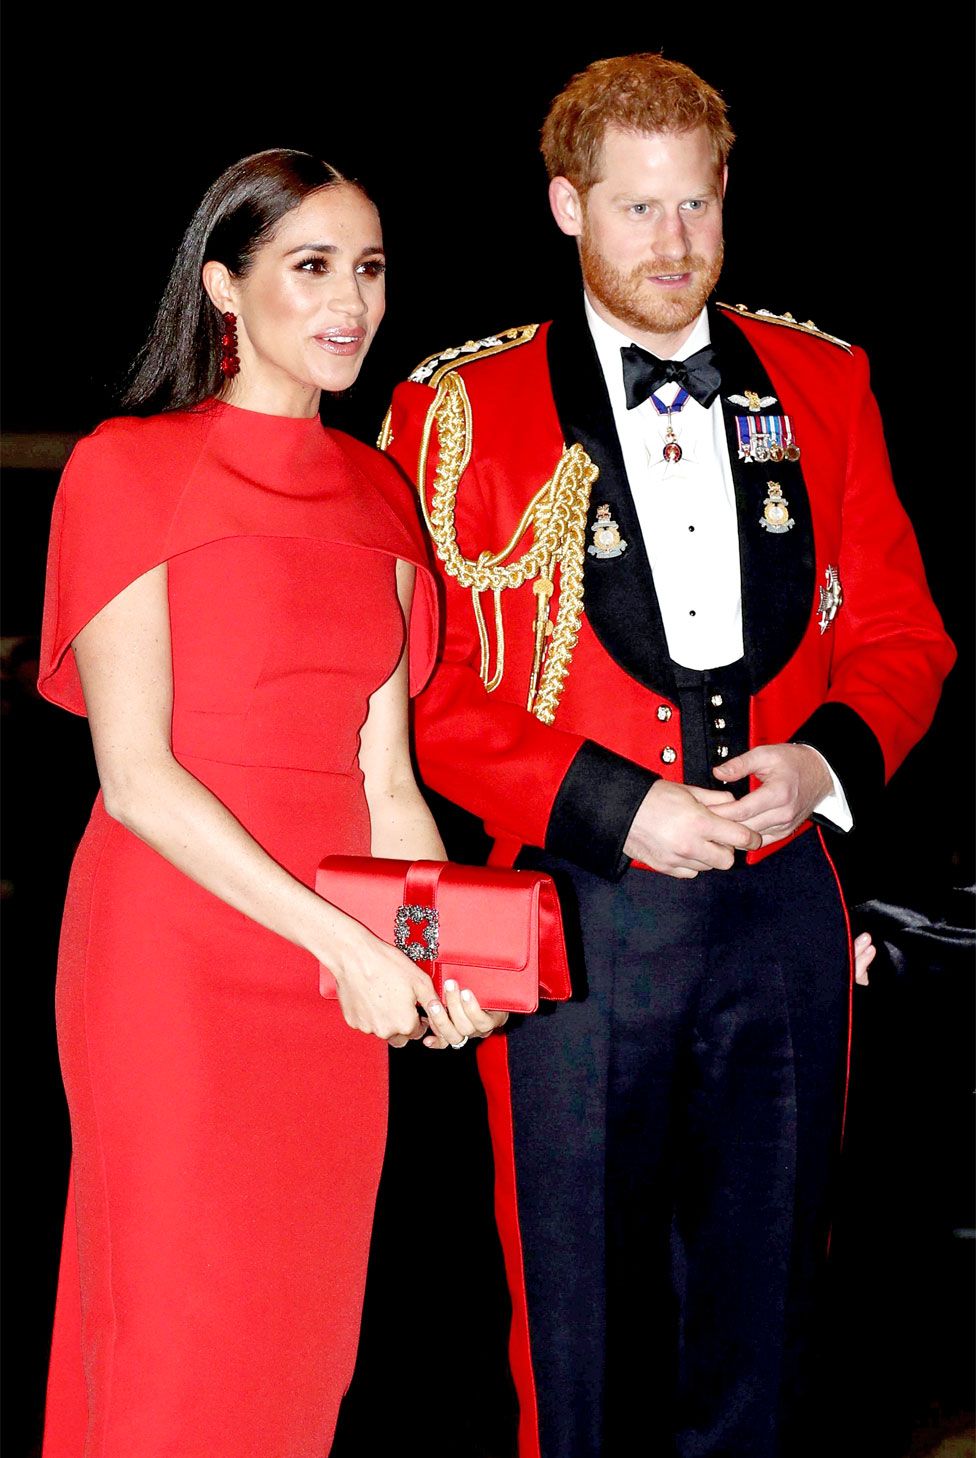 The Duke and Duchess of Sussex arrive to attend The Mountbatten Festival of Music at the Royal Albert Hall